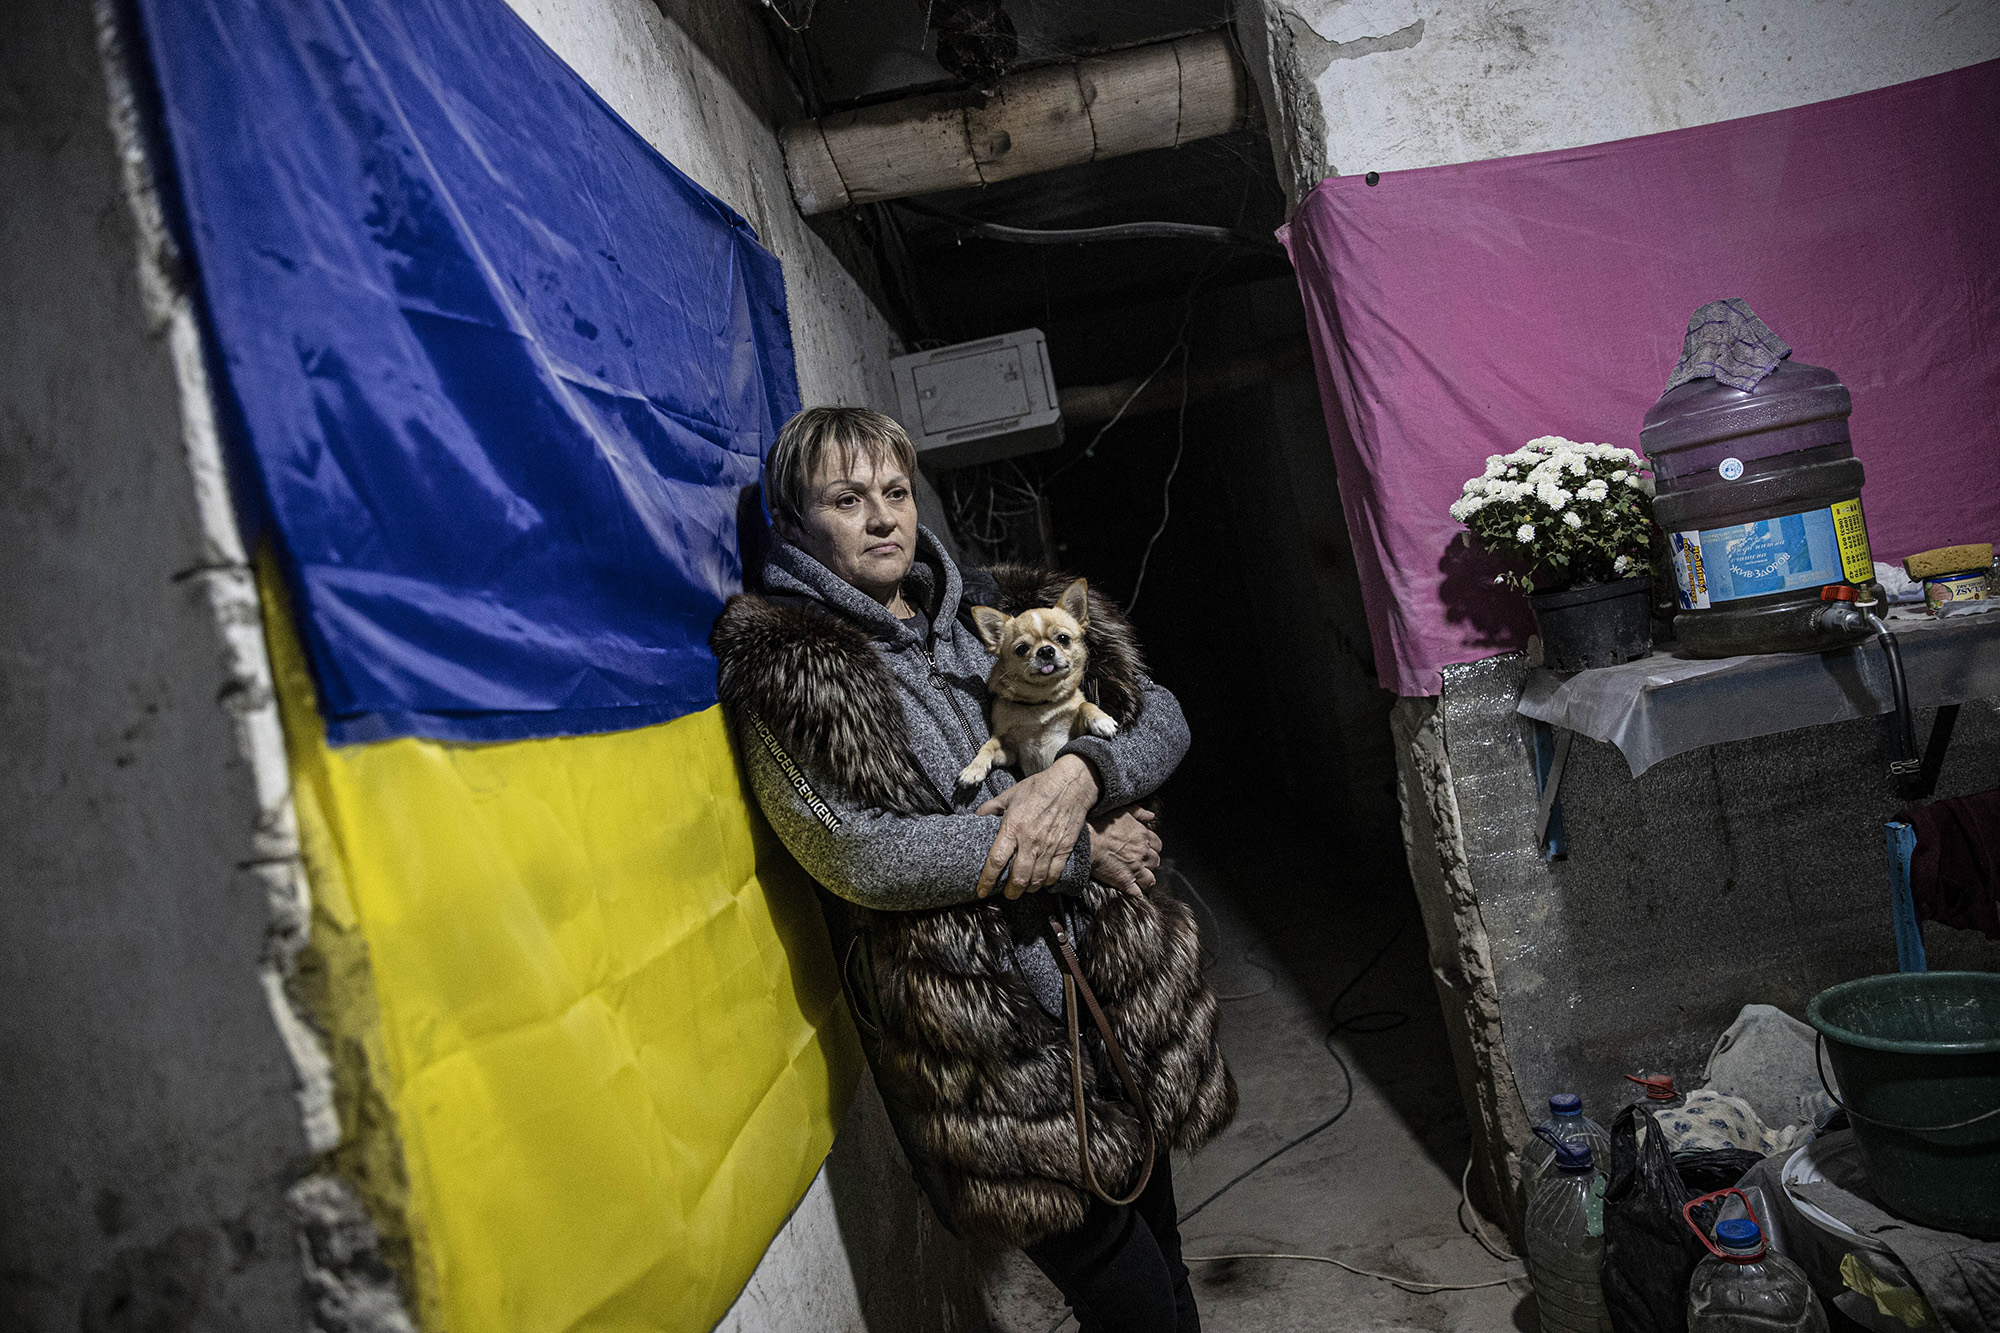 53 year-old Svetlana Lisak is seen with her dog in front of the Ukrainian flag at the shelter under her own house in Stepnohirsk, in Zaporizhzhia Oblast, Ukraine on November 1. People in the region living in towns where natural gas and drinking water services are not provided and electricity is frequently cut off, have been living in shelters under their homes for months for security reasons. 